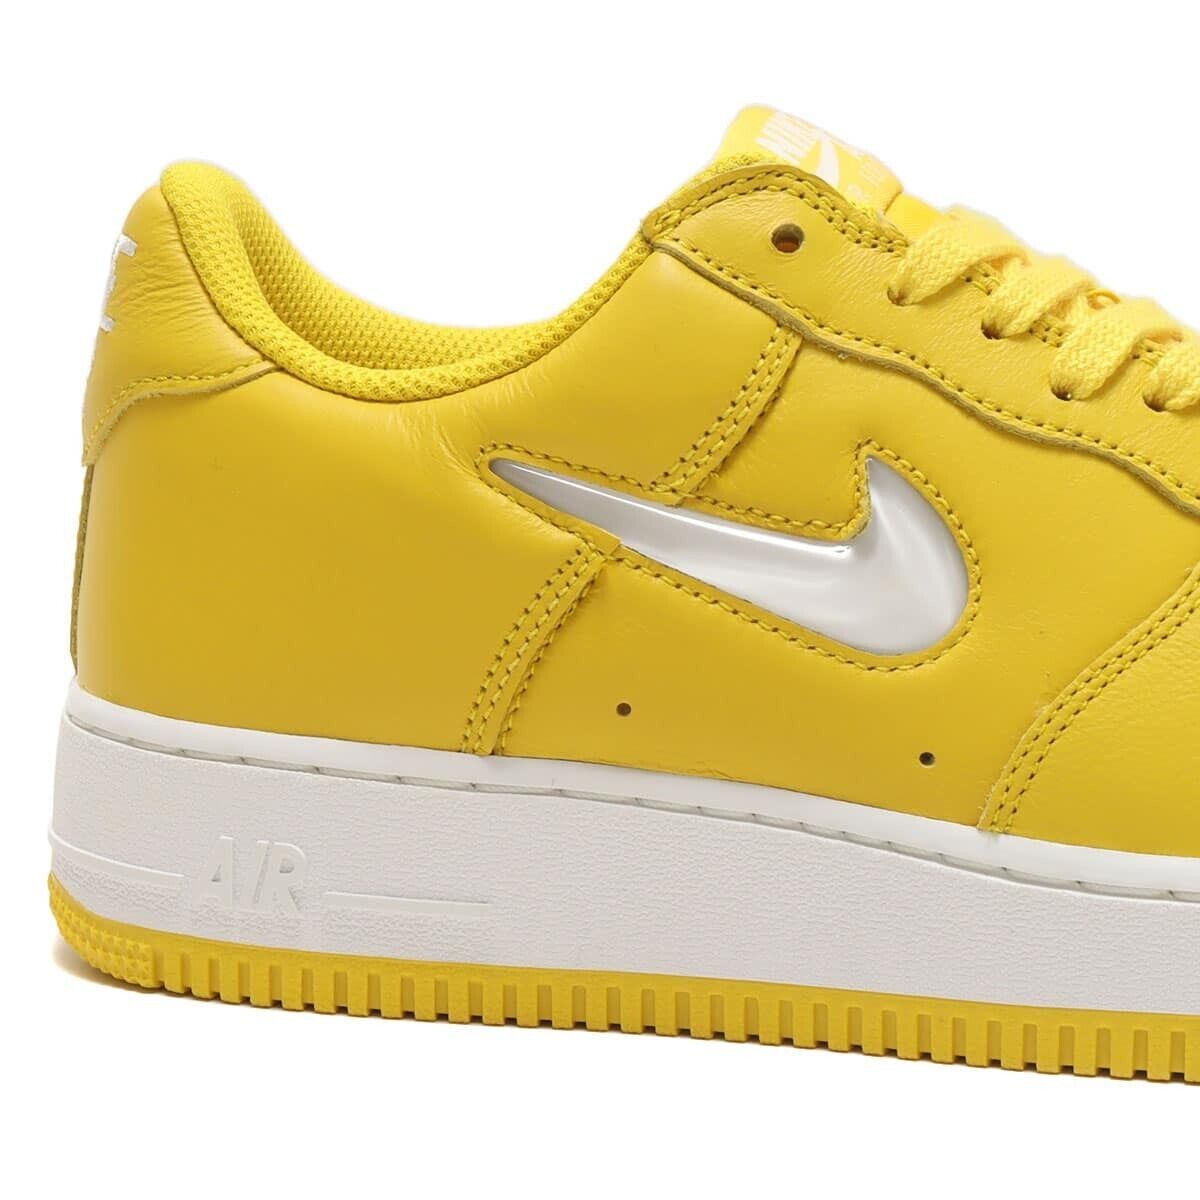 Nike Air Force 1 Low Color of the Month "Yellow" FJ1044-700 Appraised [US6.5-12]